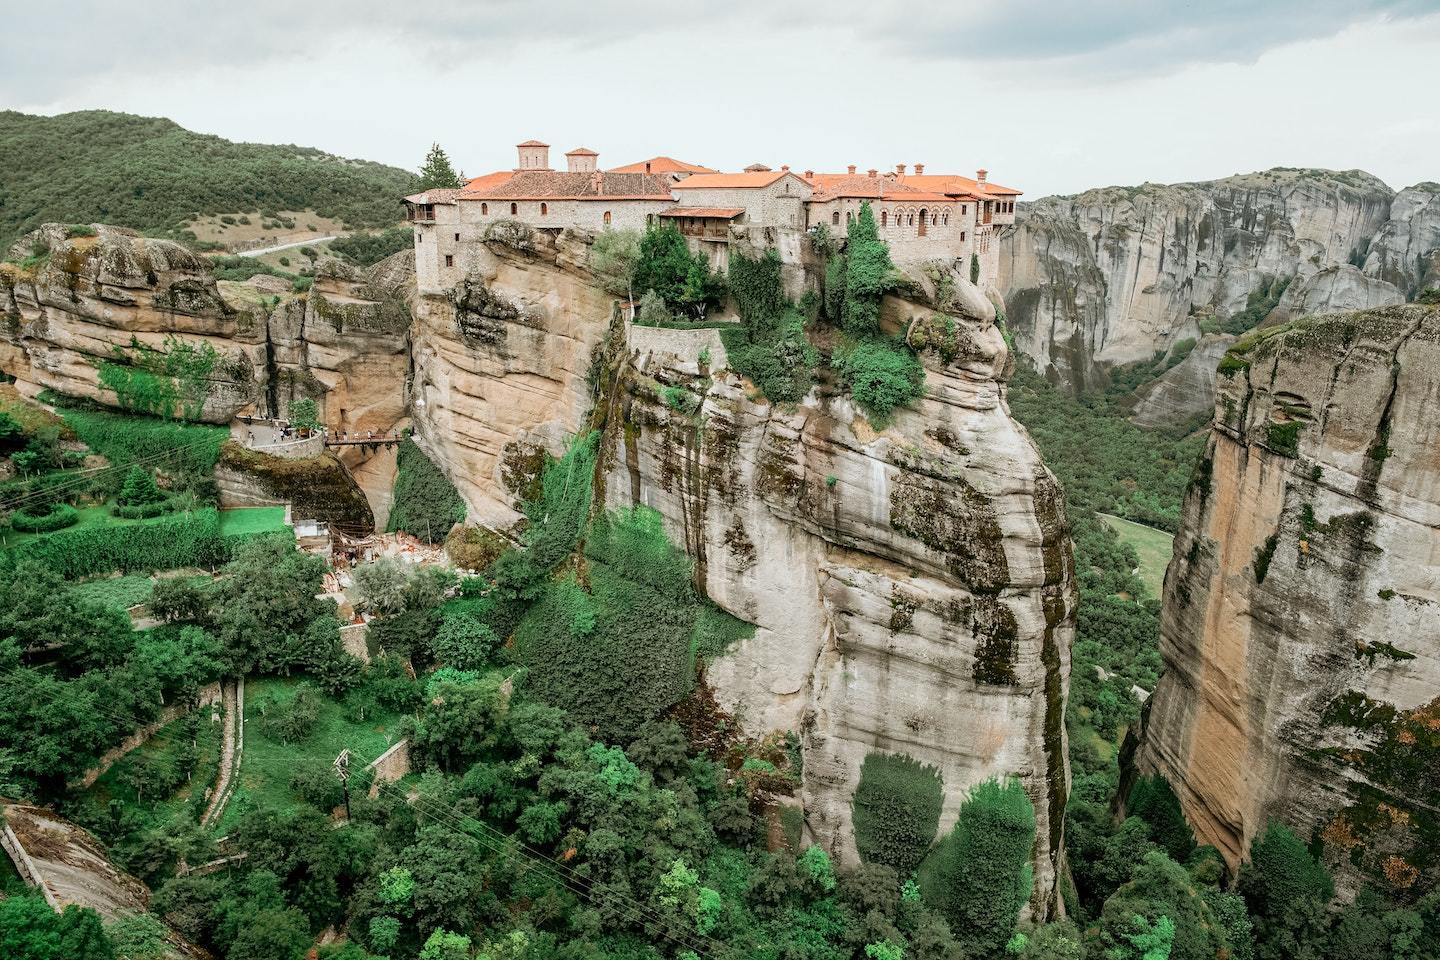 Best places to visit in Greece: Monastery sitting on top of a giant cliff in Meteora, Greece